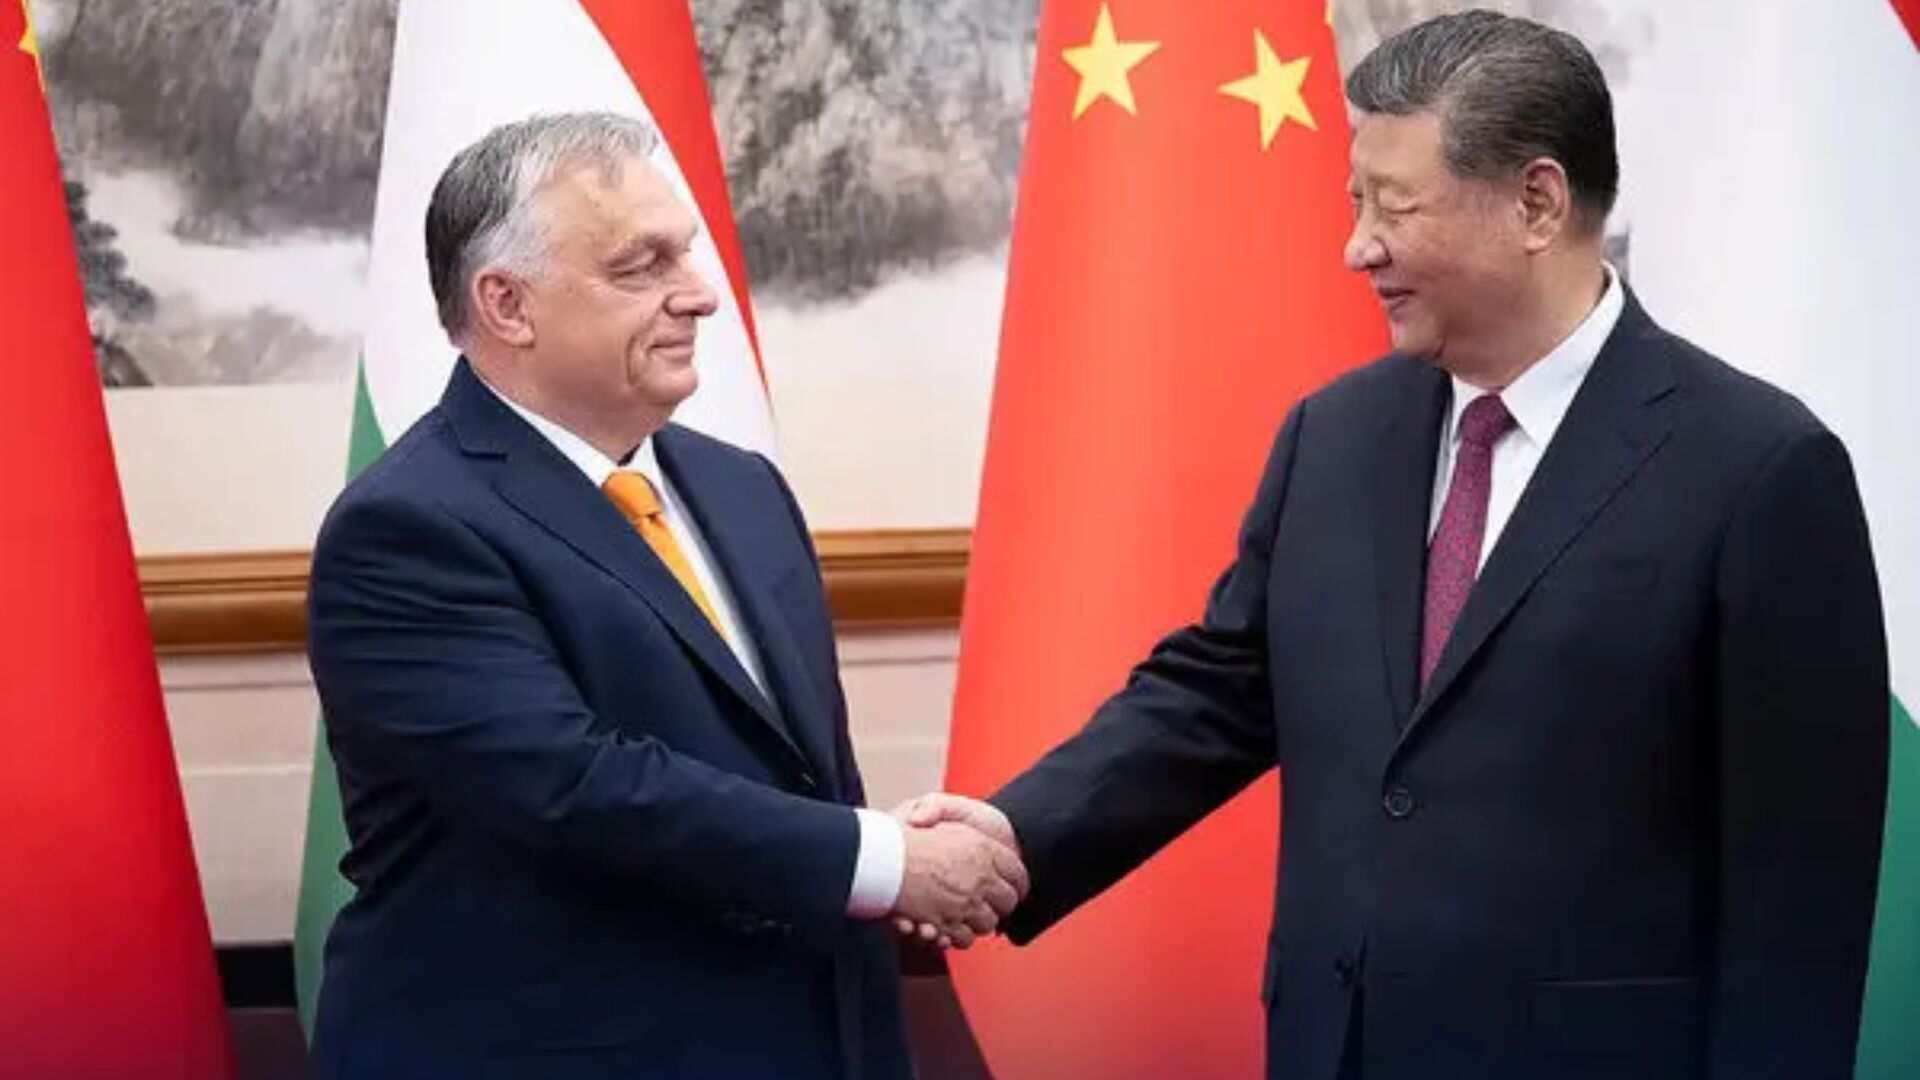 Hungary’s President Meets Xi In Beijing, Days After Talks With Putin